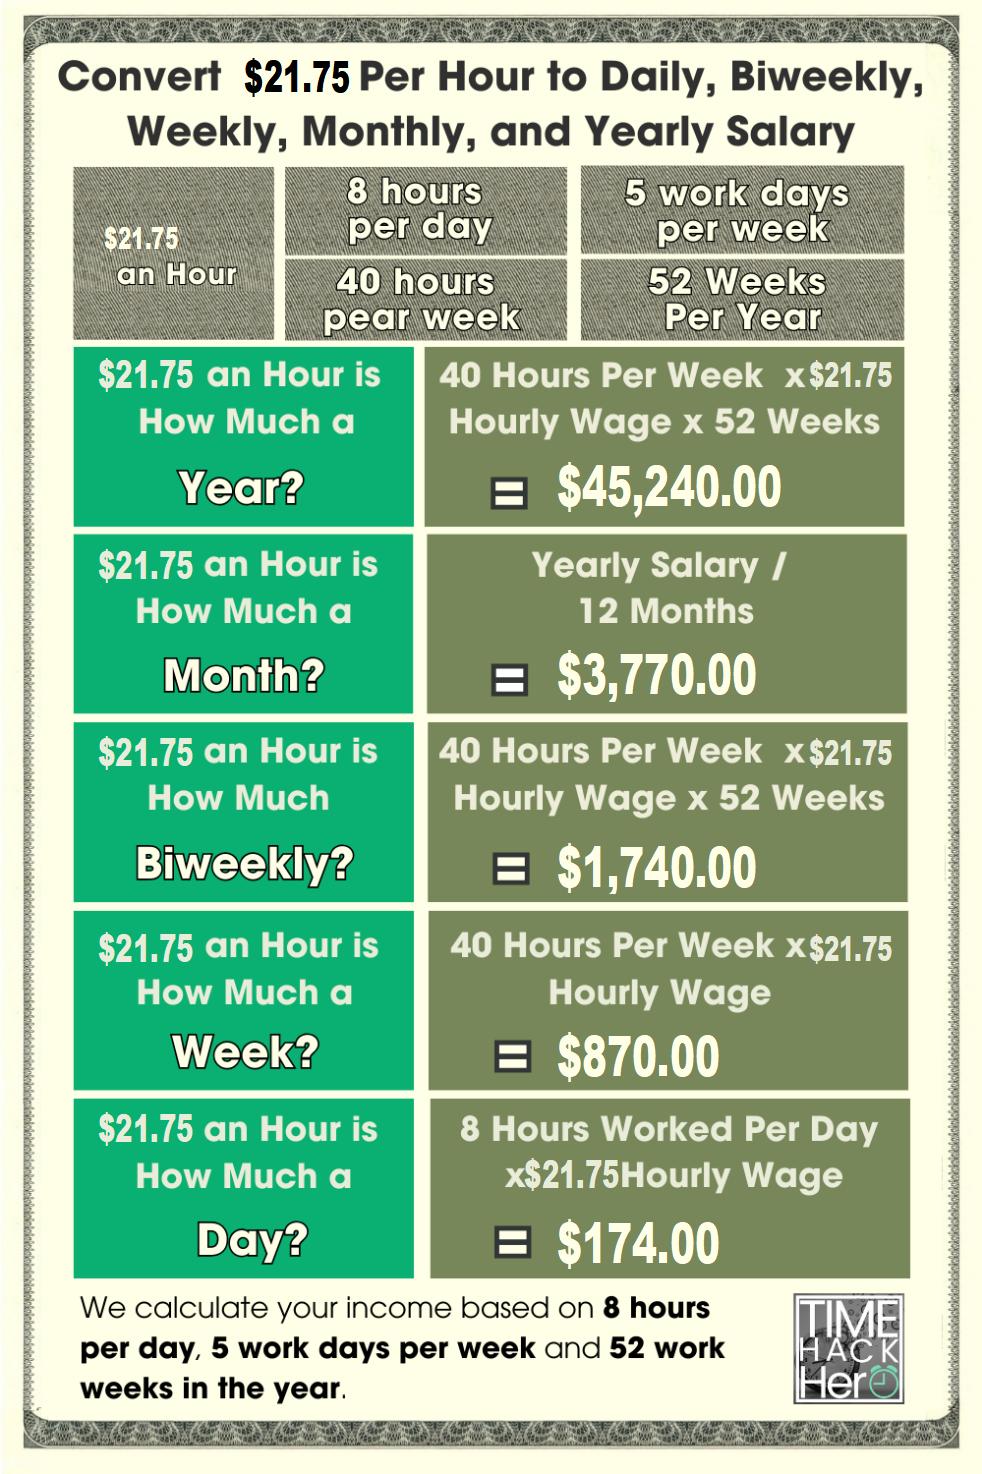 Convert $21.75 Per Hour to Weekly, Monthly, and Yearly Salary